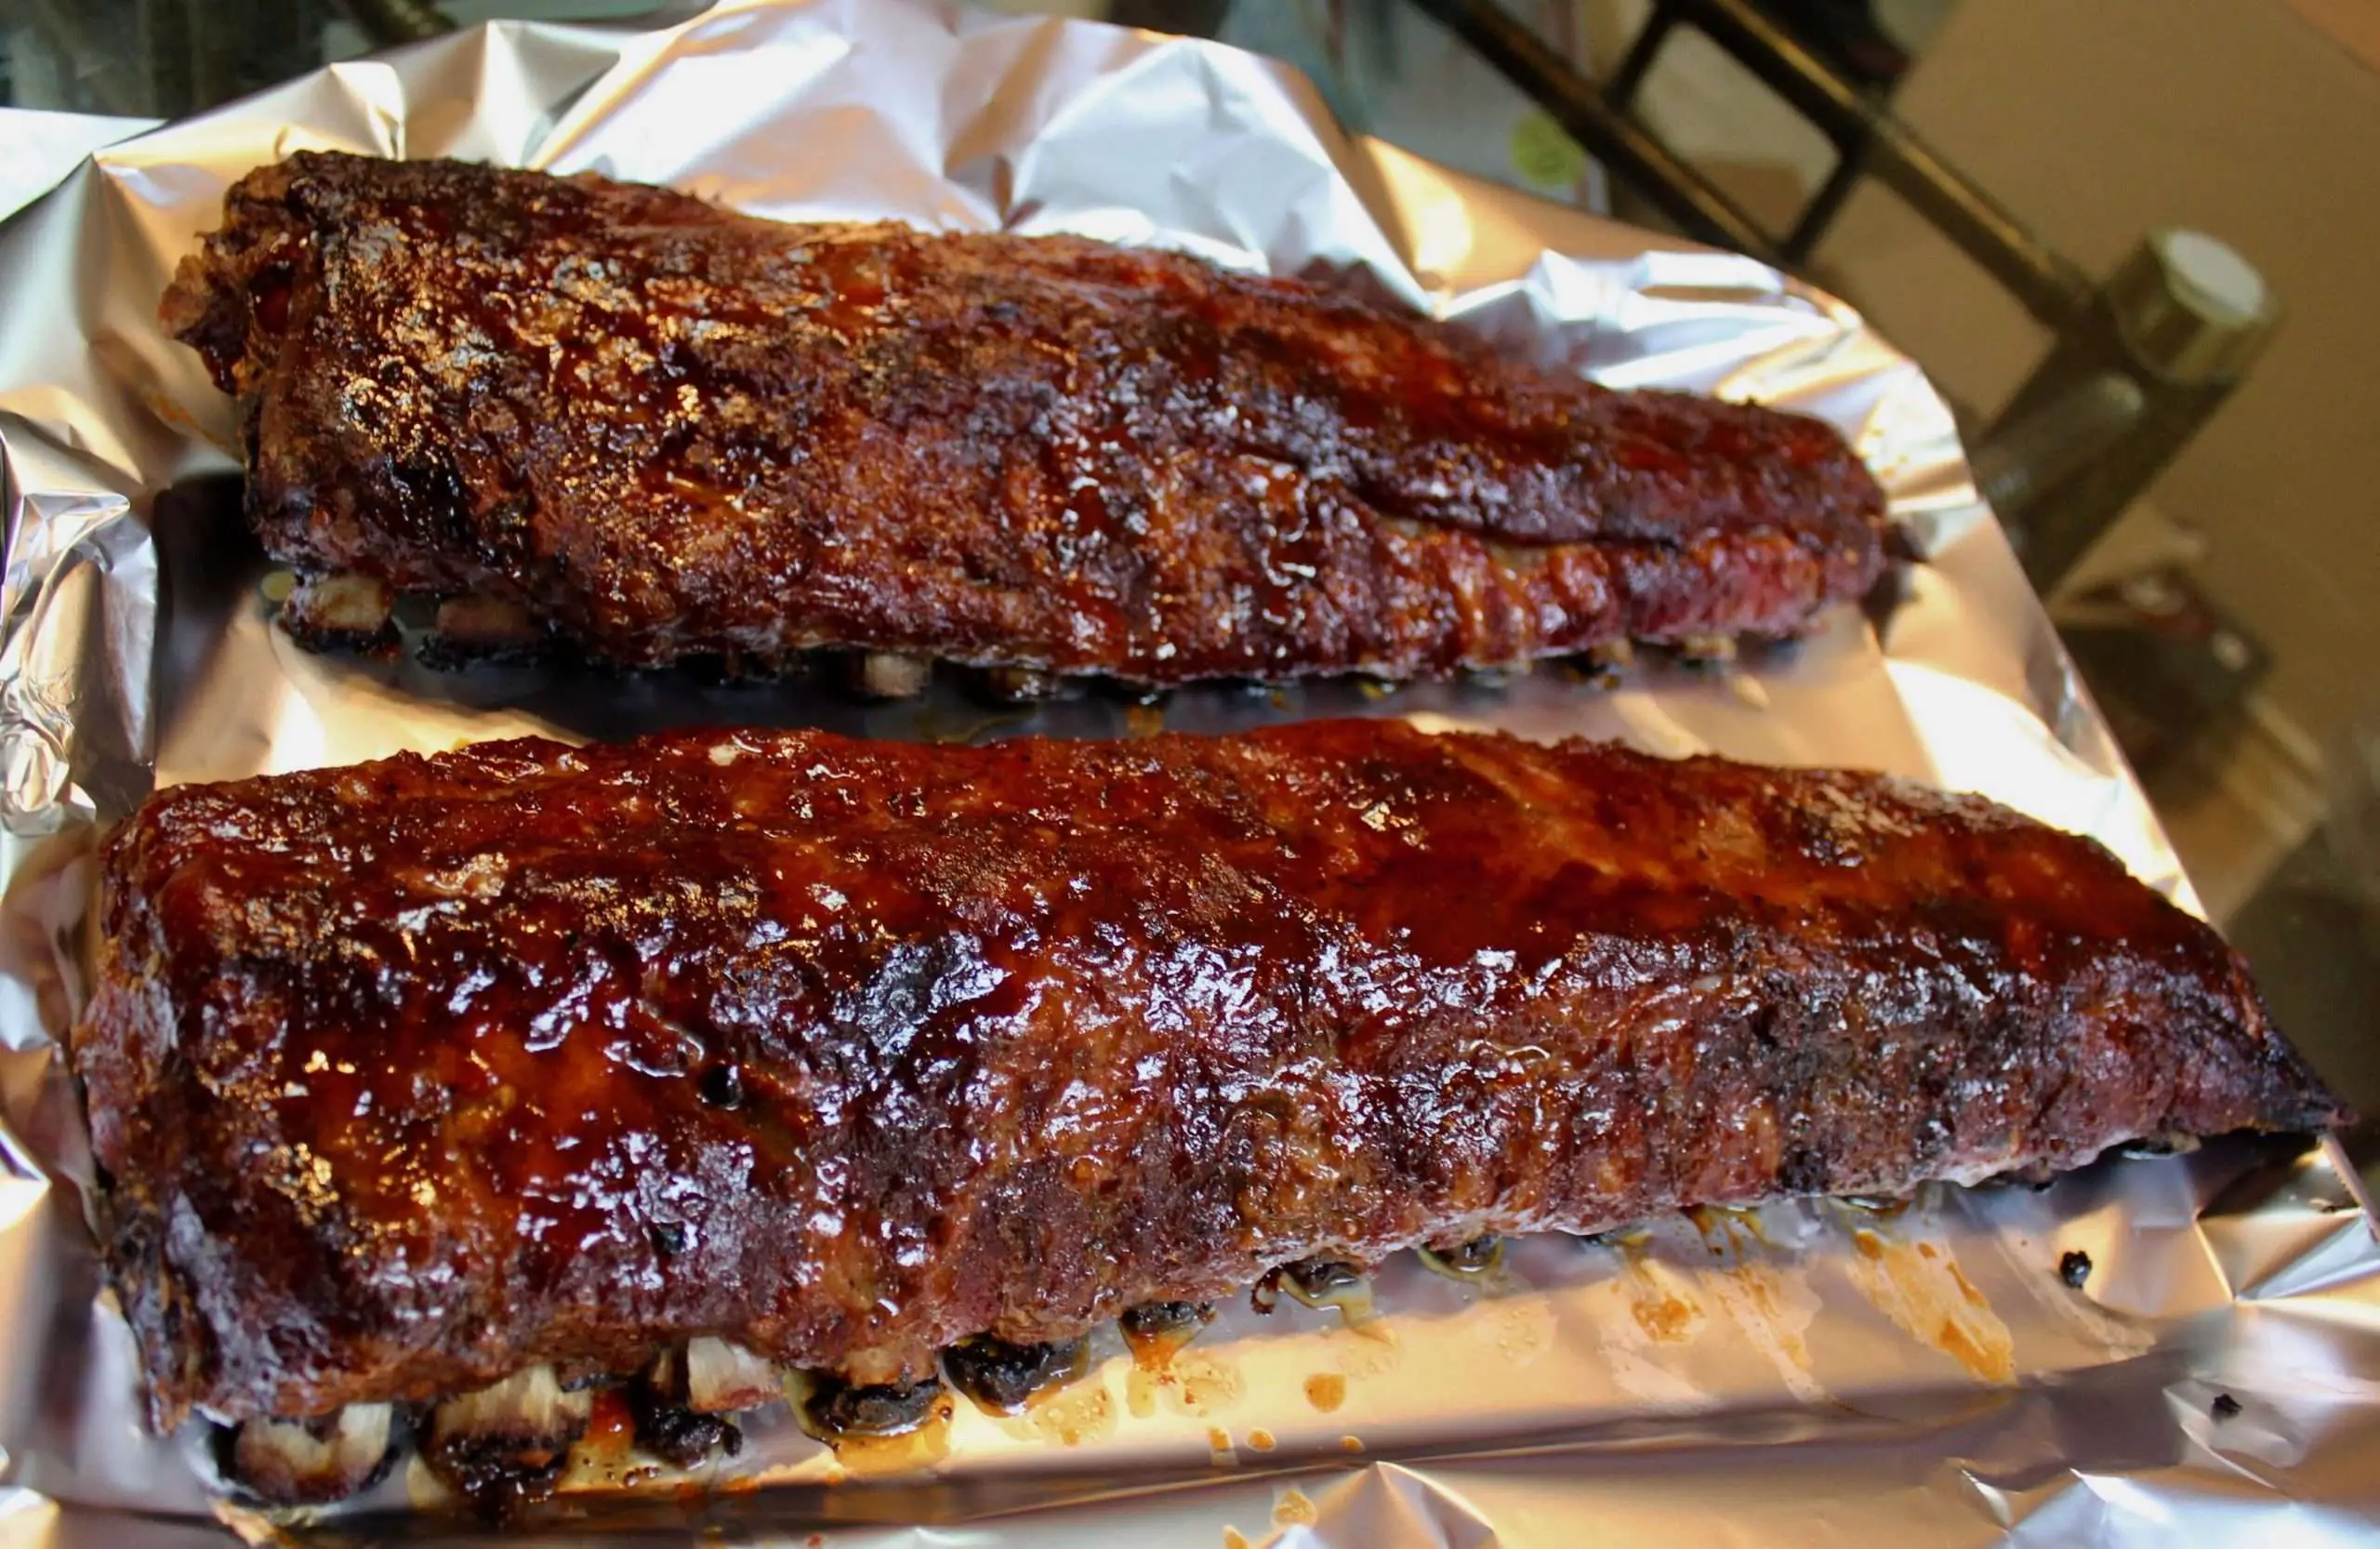 Cooked baby back ribs on the grill yesterday [Homemade] # ...